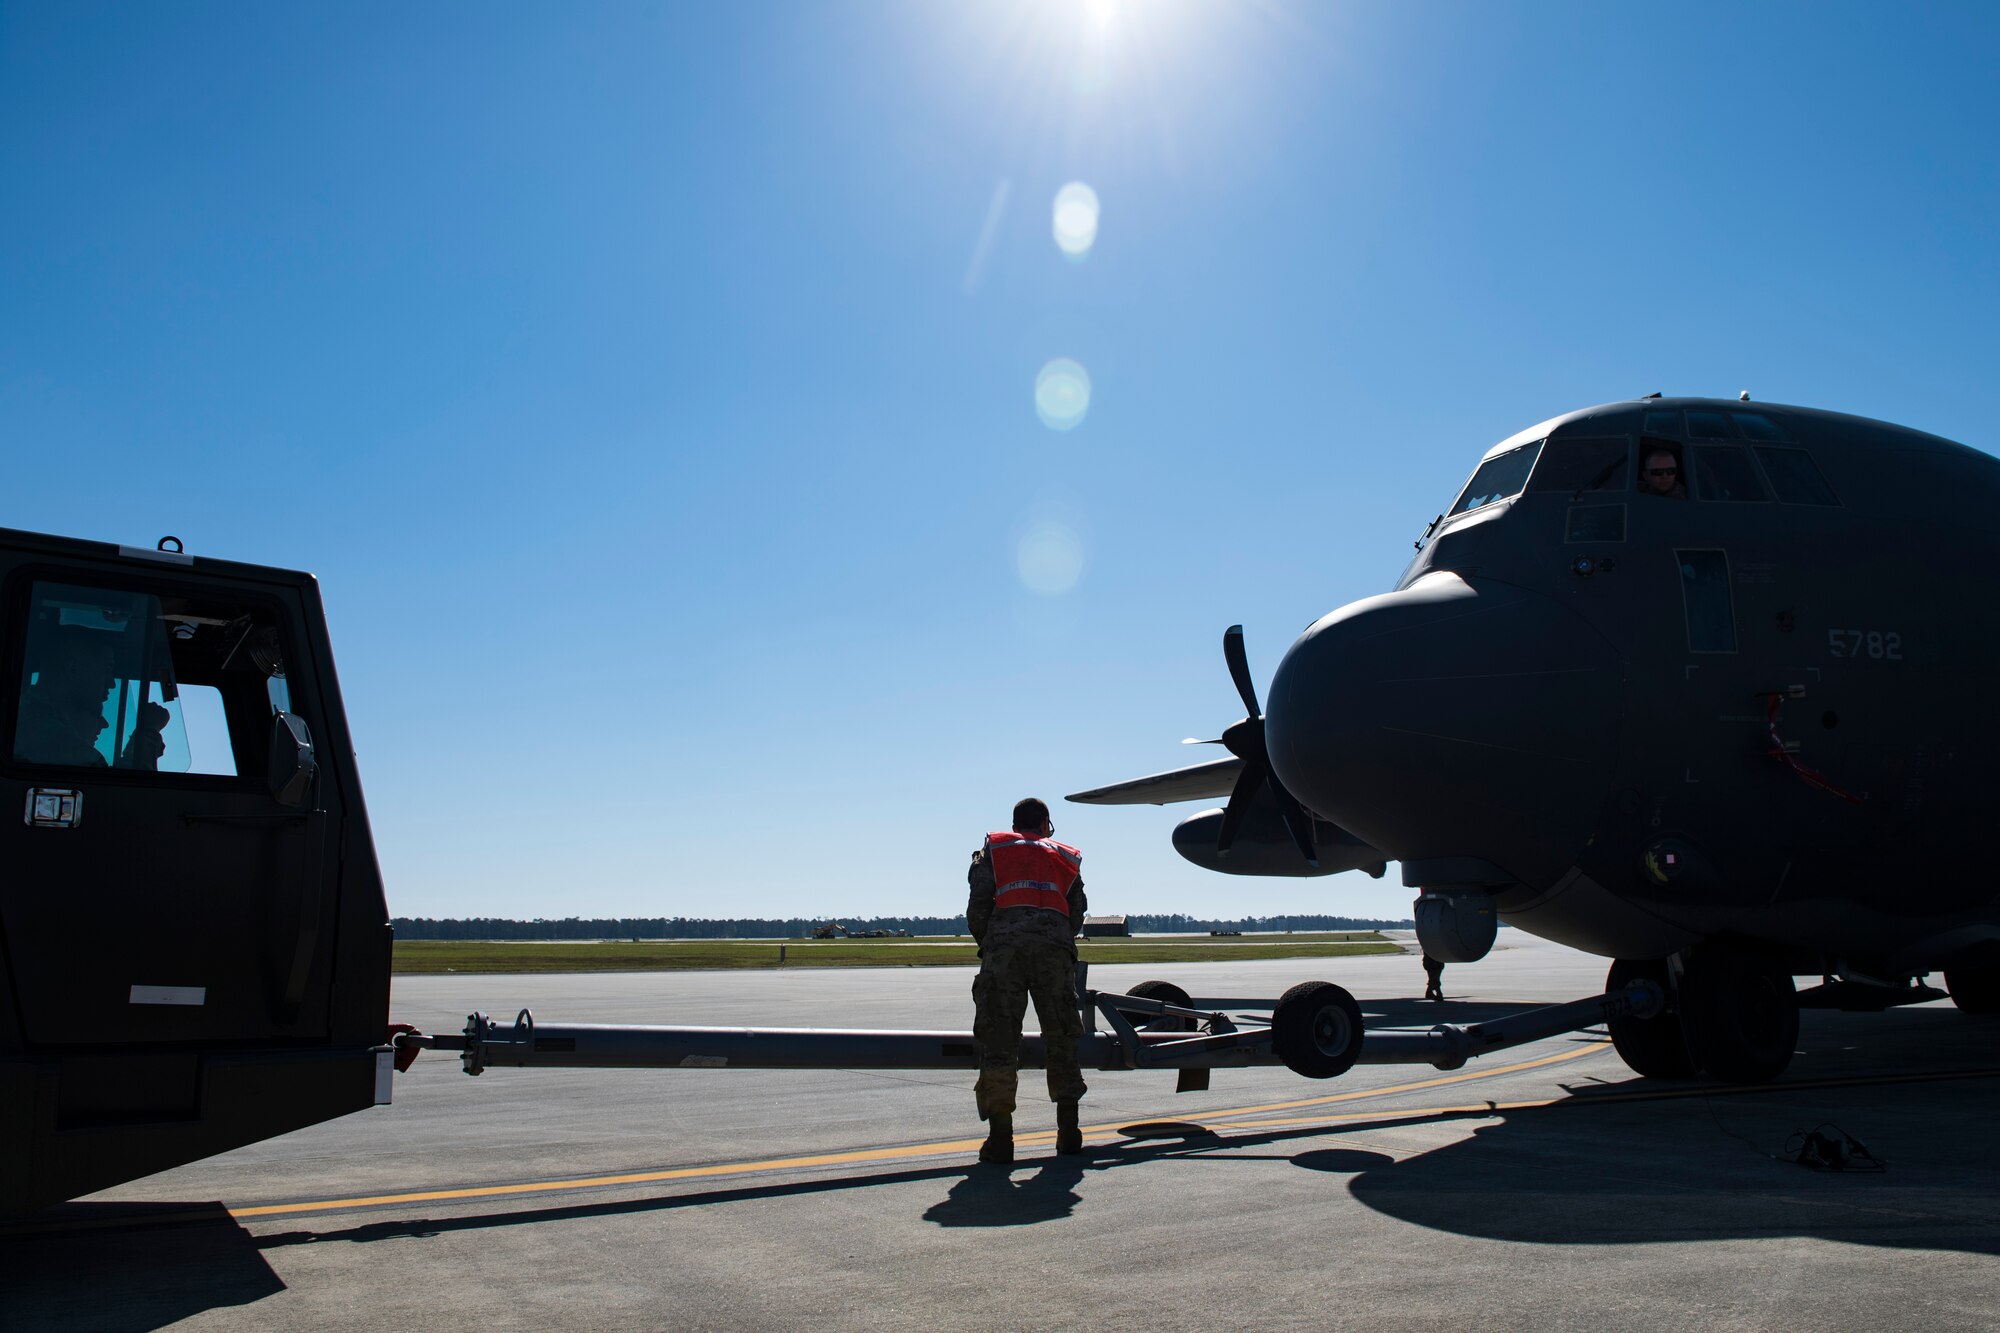 Airmen from the 71st Aircraft Maintenance Unit tow an HC-130J Combat King II during an aircraft pull challenge, March 9, 2018, at Moody Air Force Base, Ga. The challenge was part of a Comprehensive Airman Fitness super sports day event where the 71st AMU and 41st Helicopter Maintenance Unit faced off for bragging rights. (U.S. Air Force Photo by Senior Airman Janiqua P. Robinson)